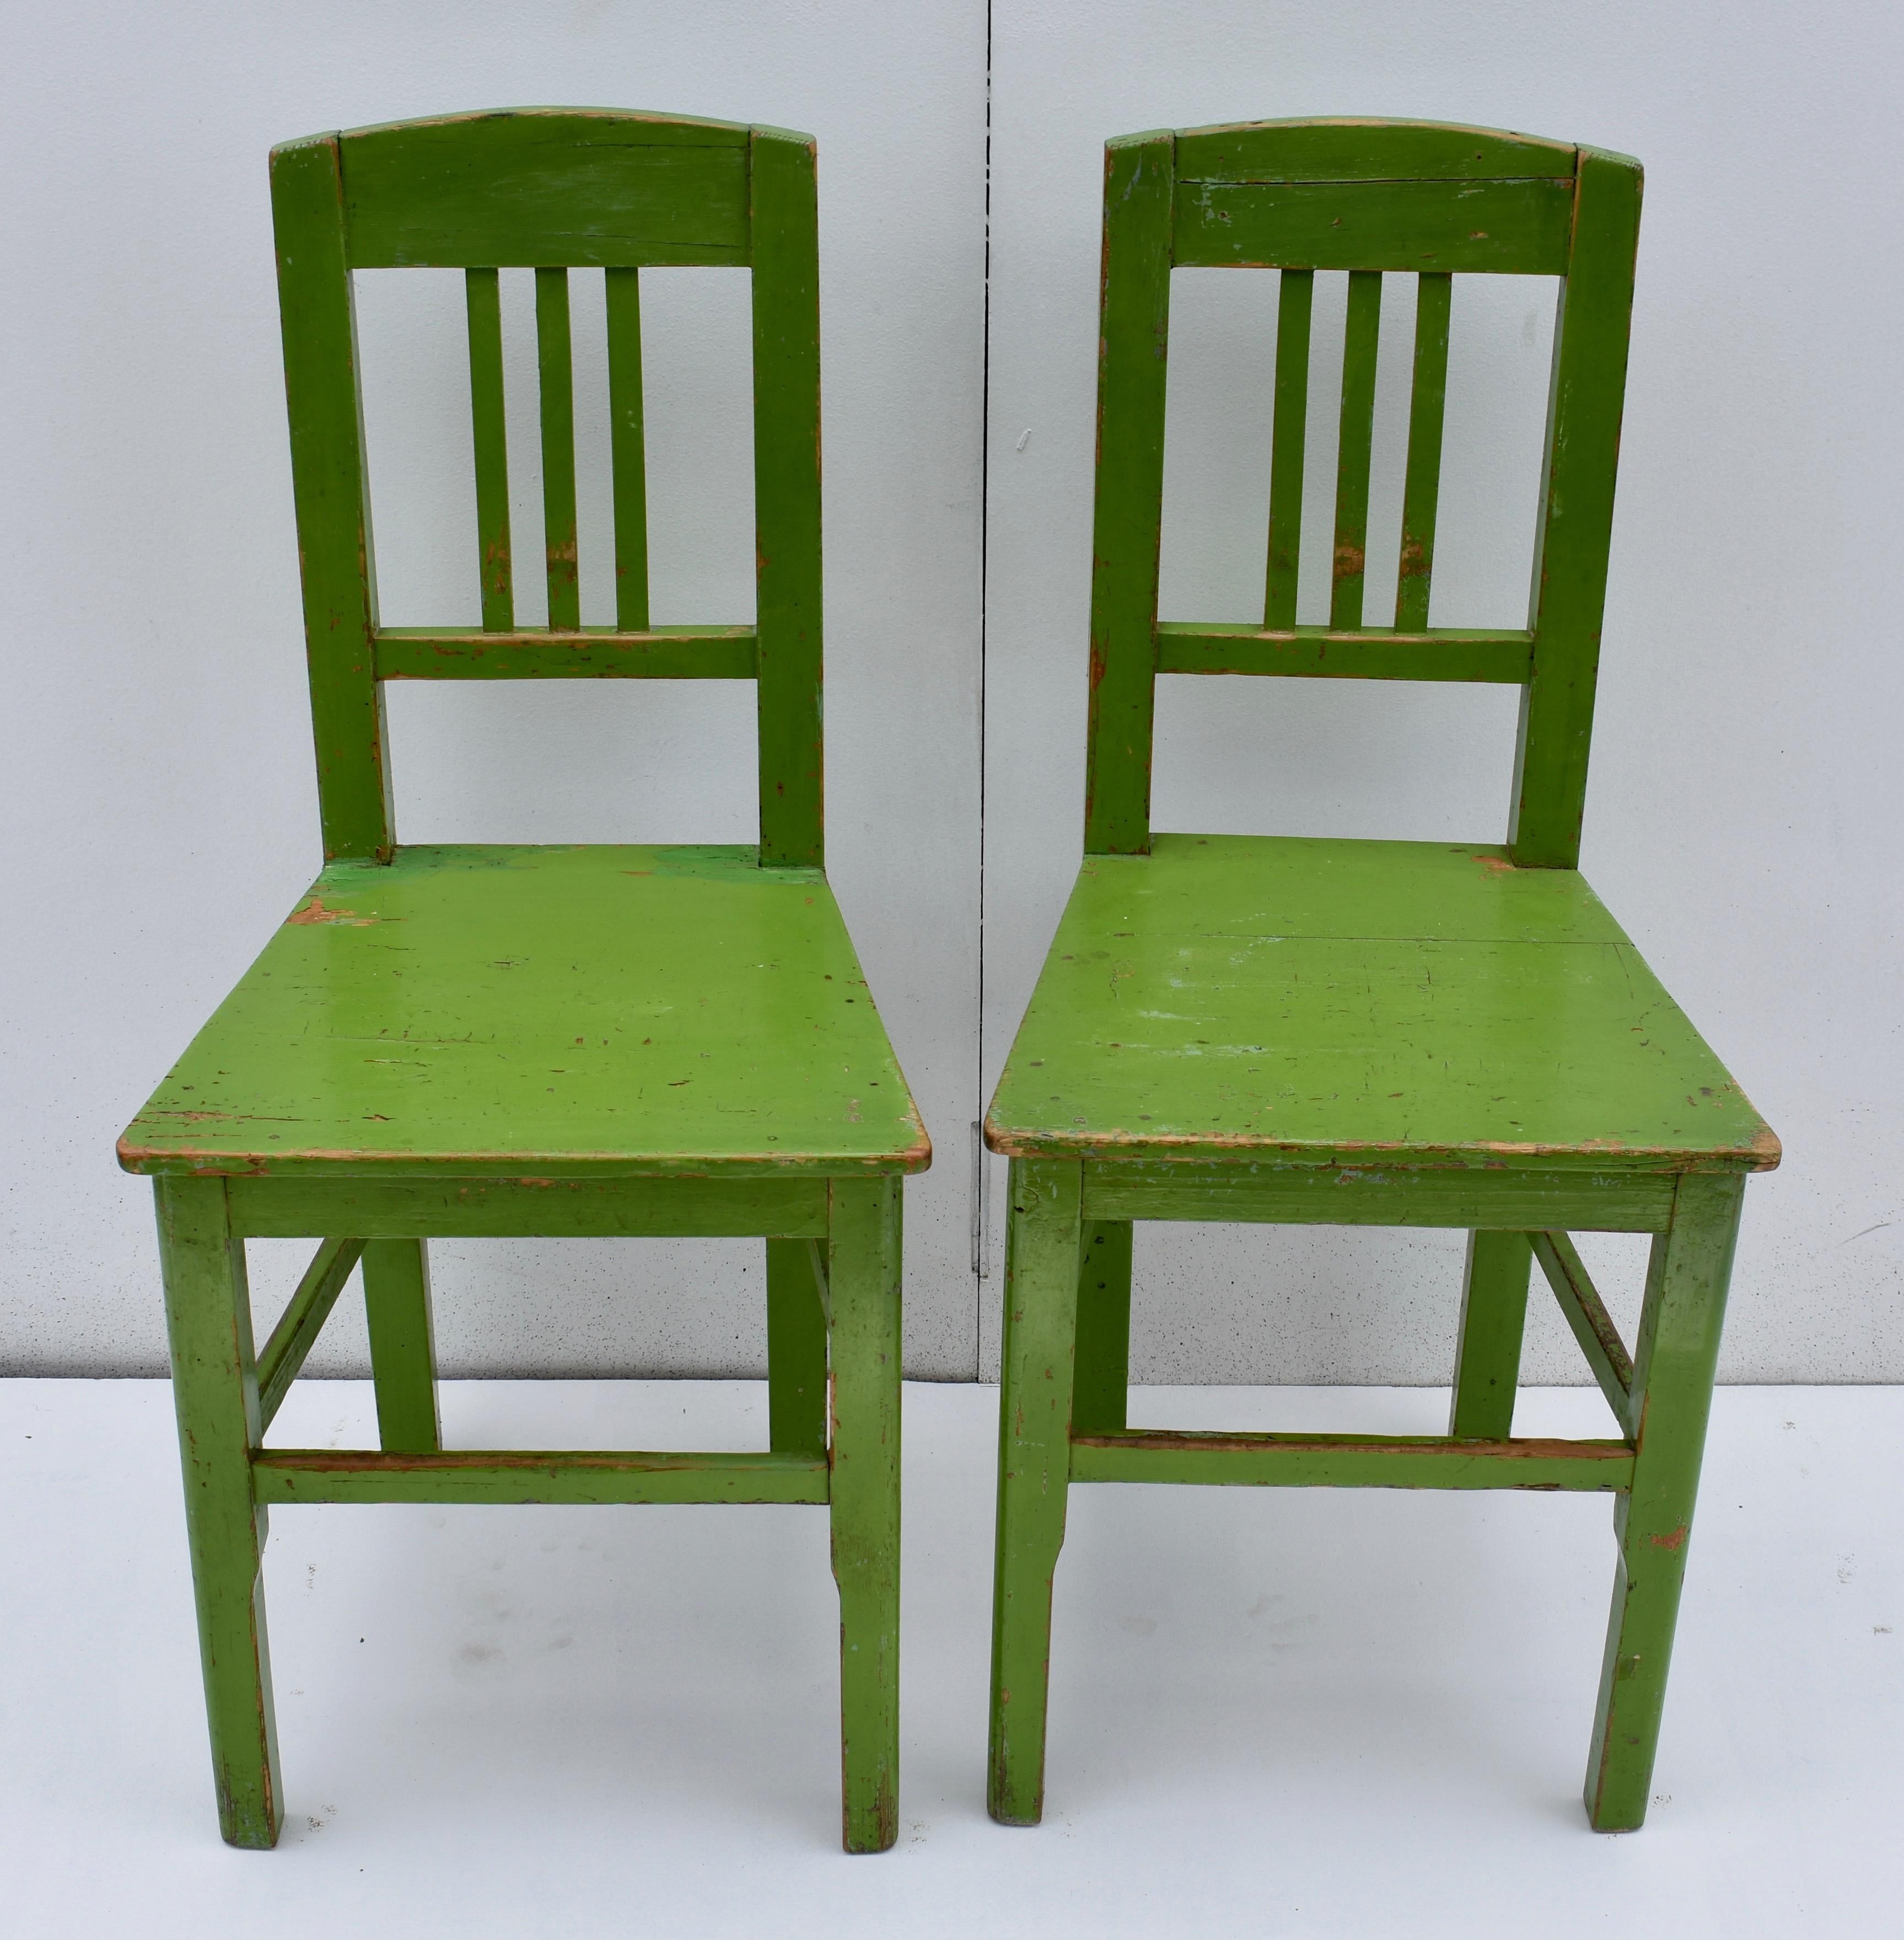 These attractive central European plank-seat Side chairs have three narrow slats to the back and the legs are joined with three mortised-in stretchers. The lower parts of the front legs are nicely chamfered. The worn and chipped green paint has been